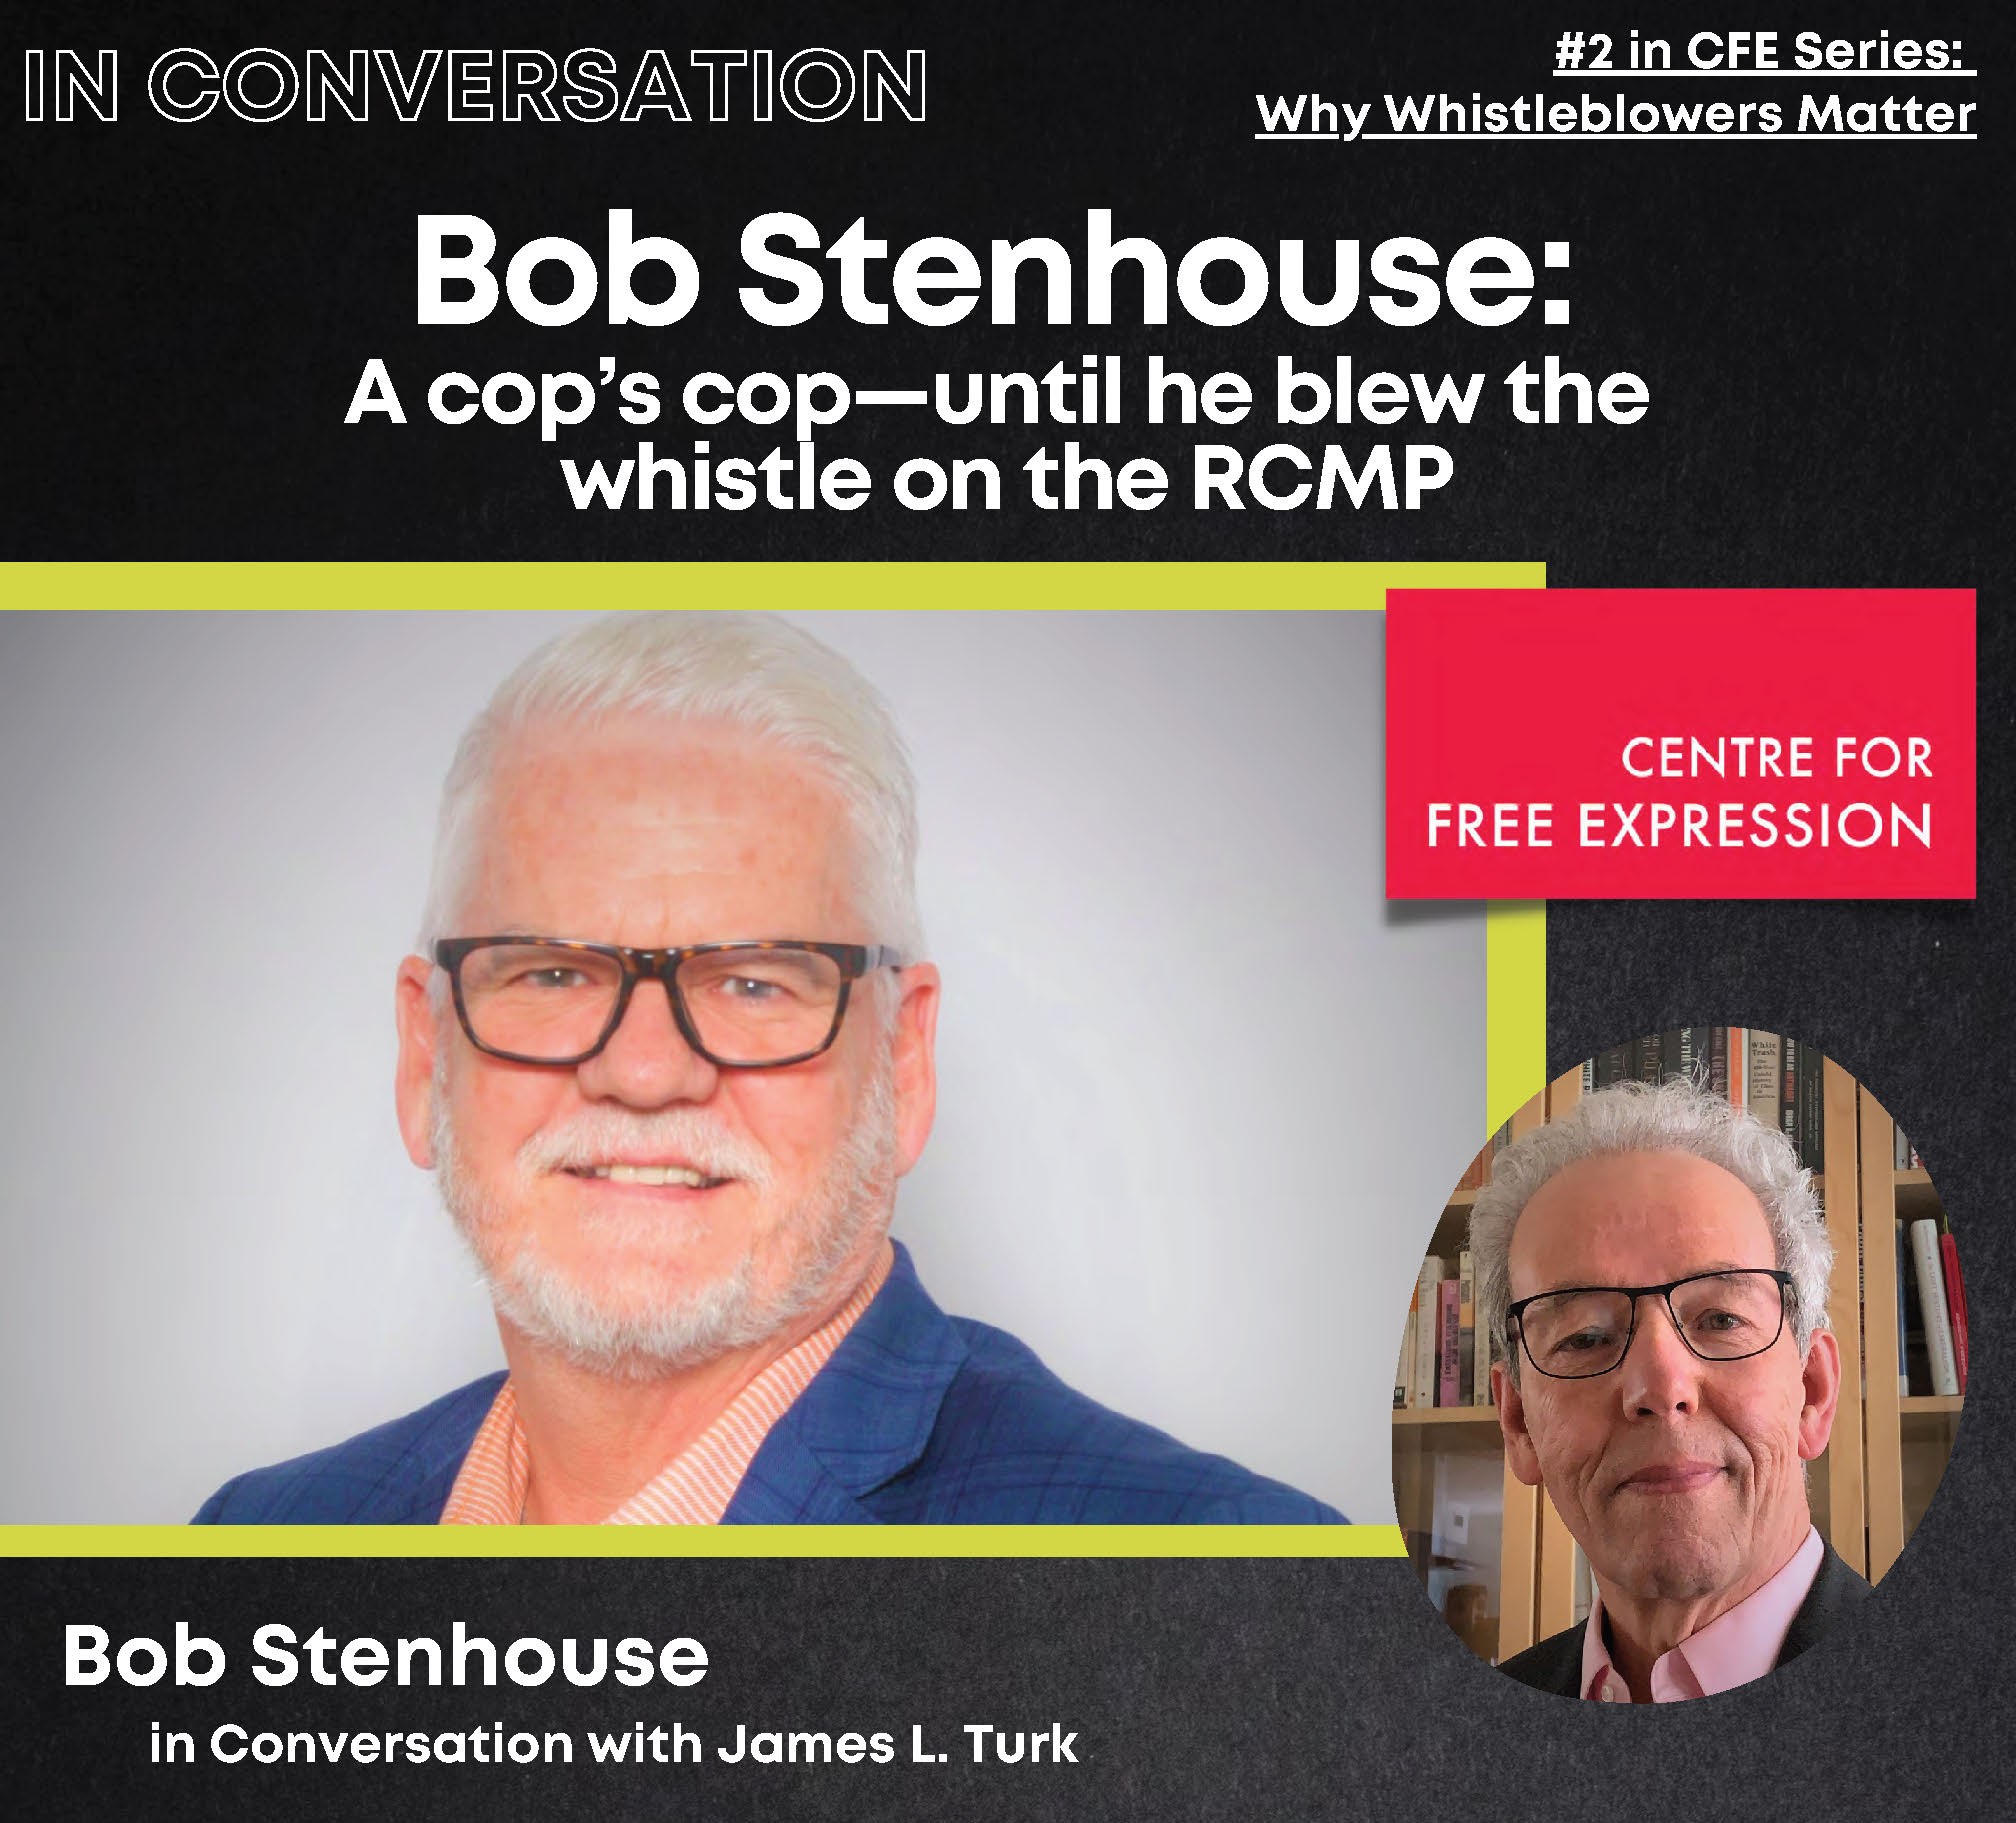 Bob Stenhouse: A cop’s cop - until he blew the whistle on the RCMP